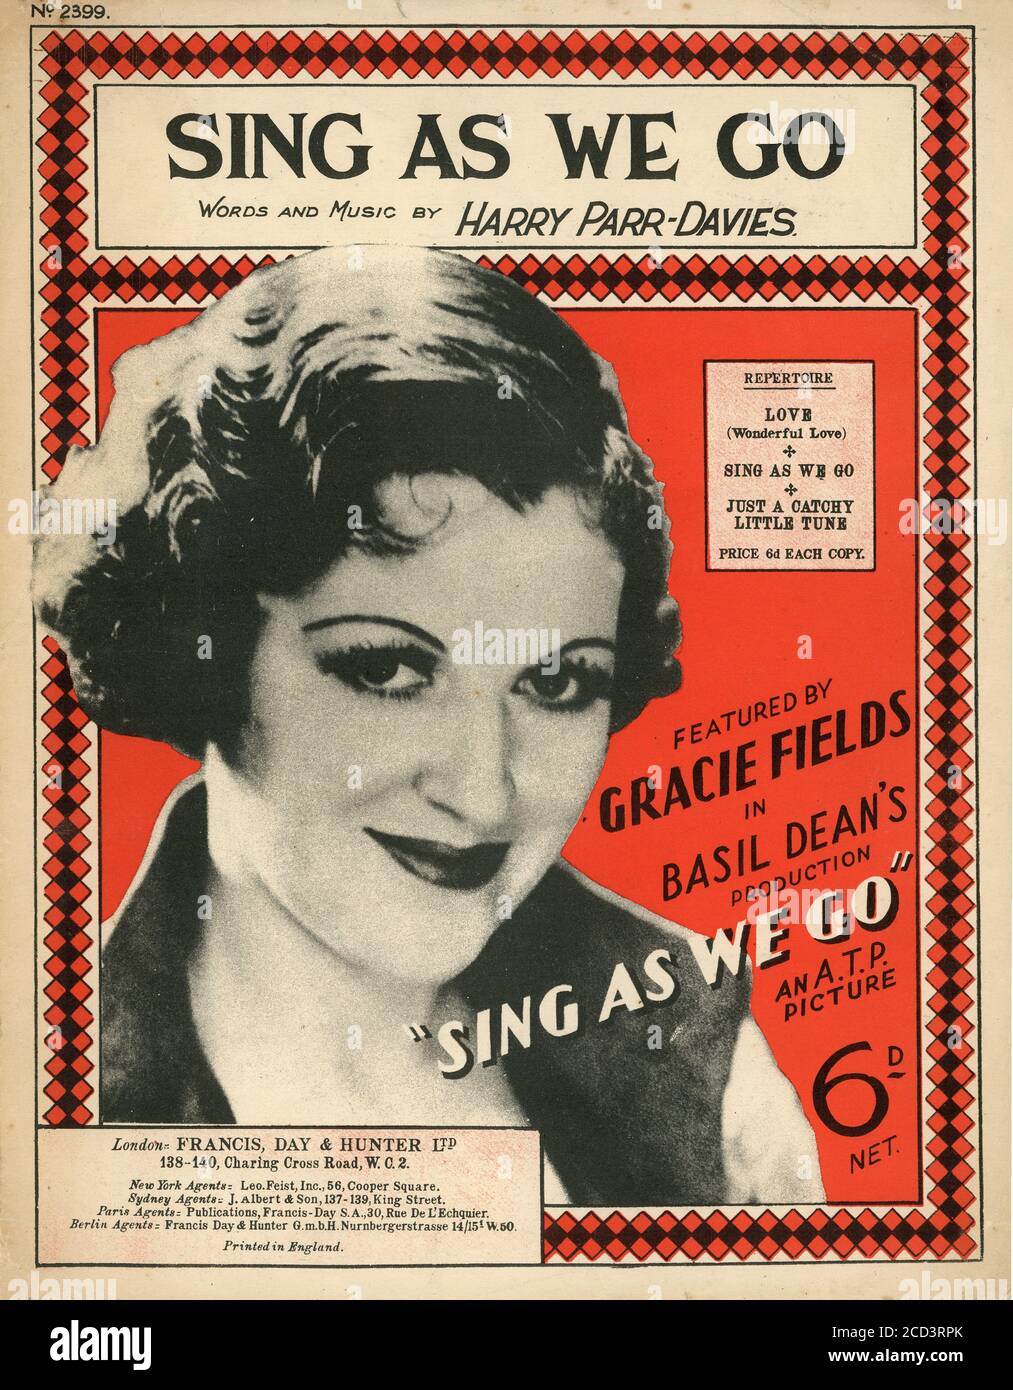 Sheet Music - Sing as we go - Gracie Fields - 1934 Stock Photo